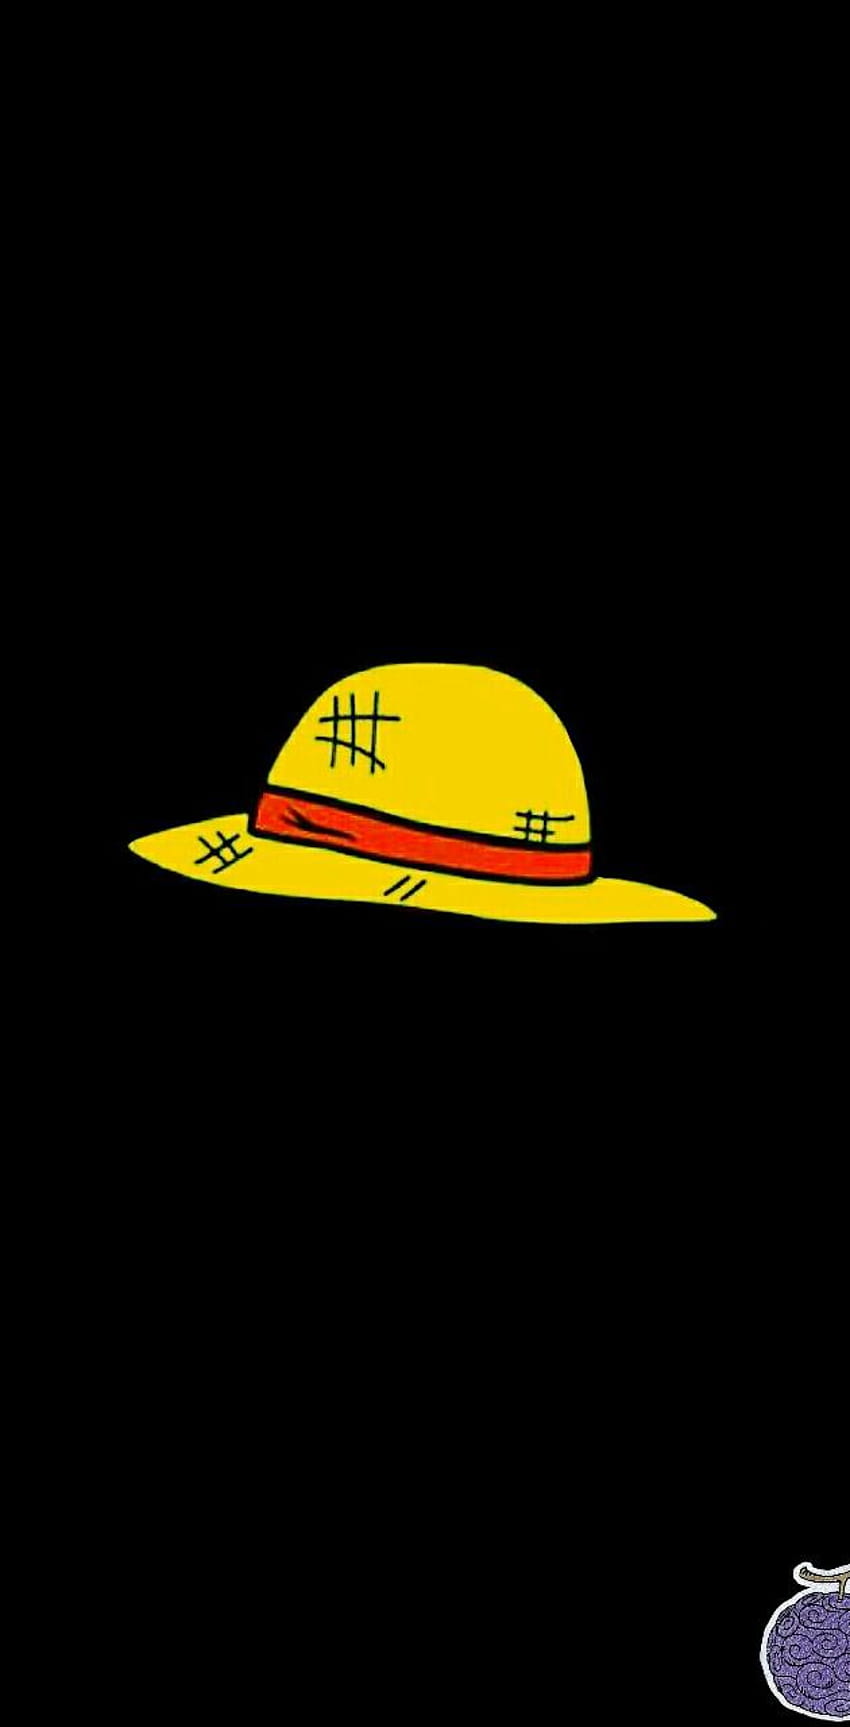 StrawHat by EA_Graphic、麦わら帽子のロゴ HD電話の壁紙